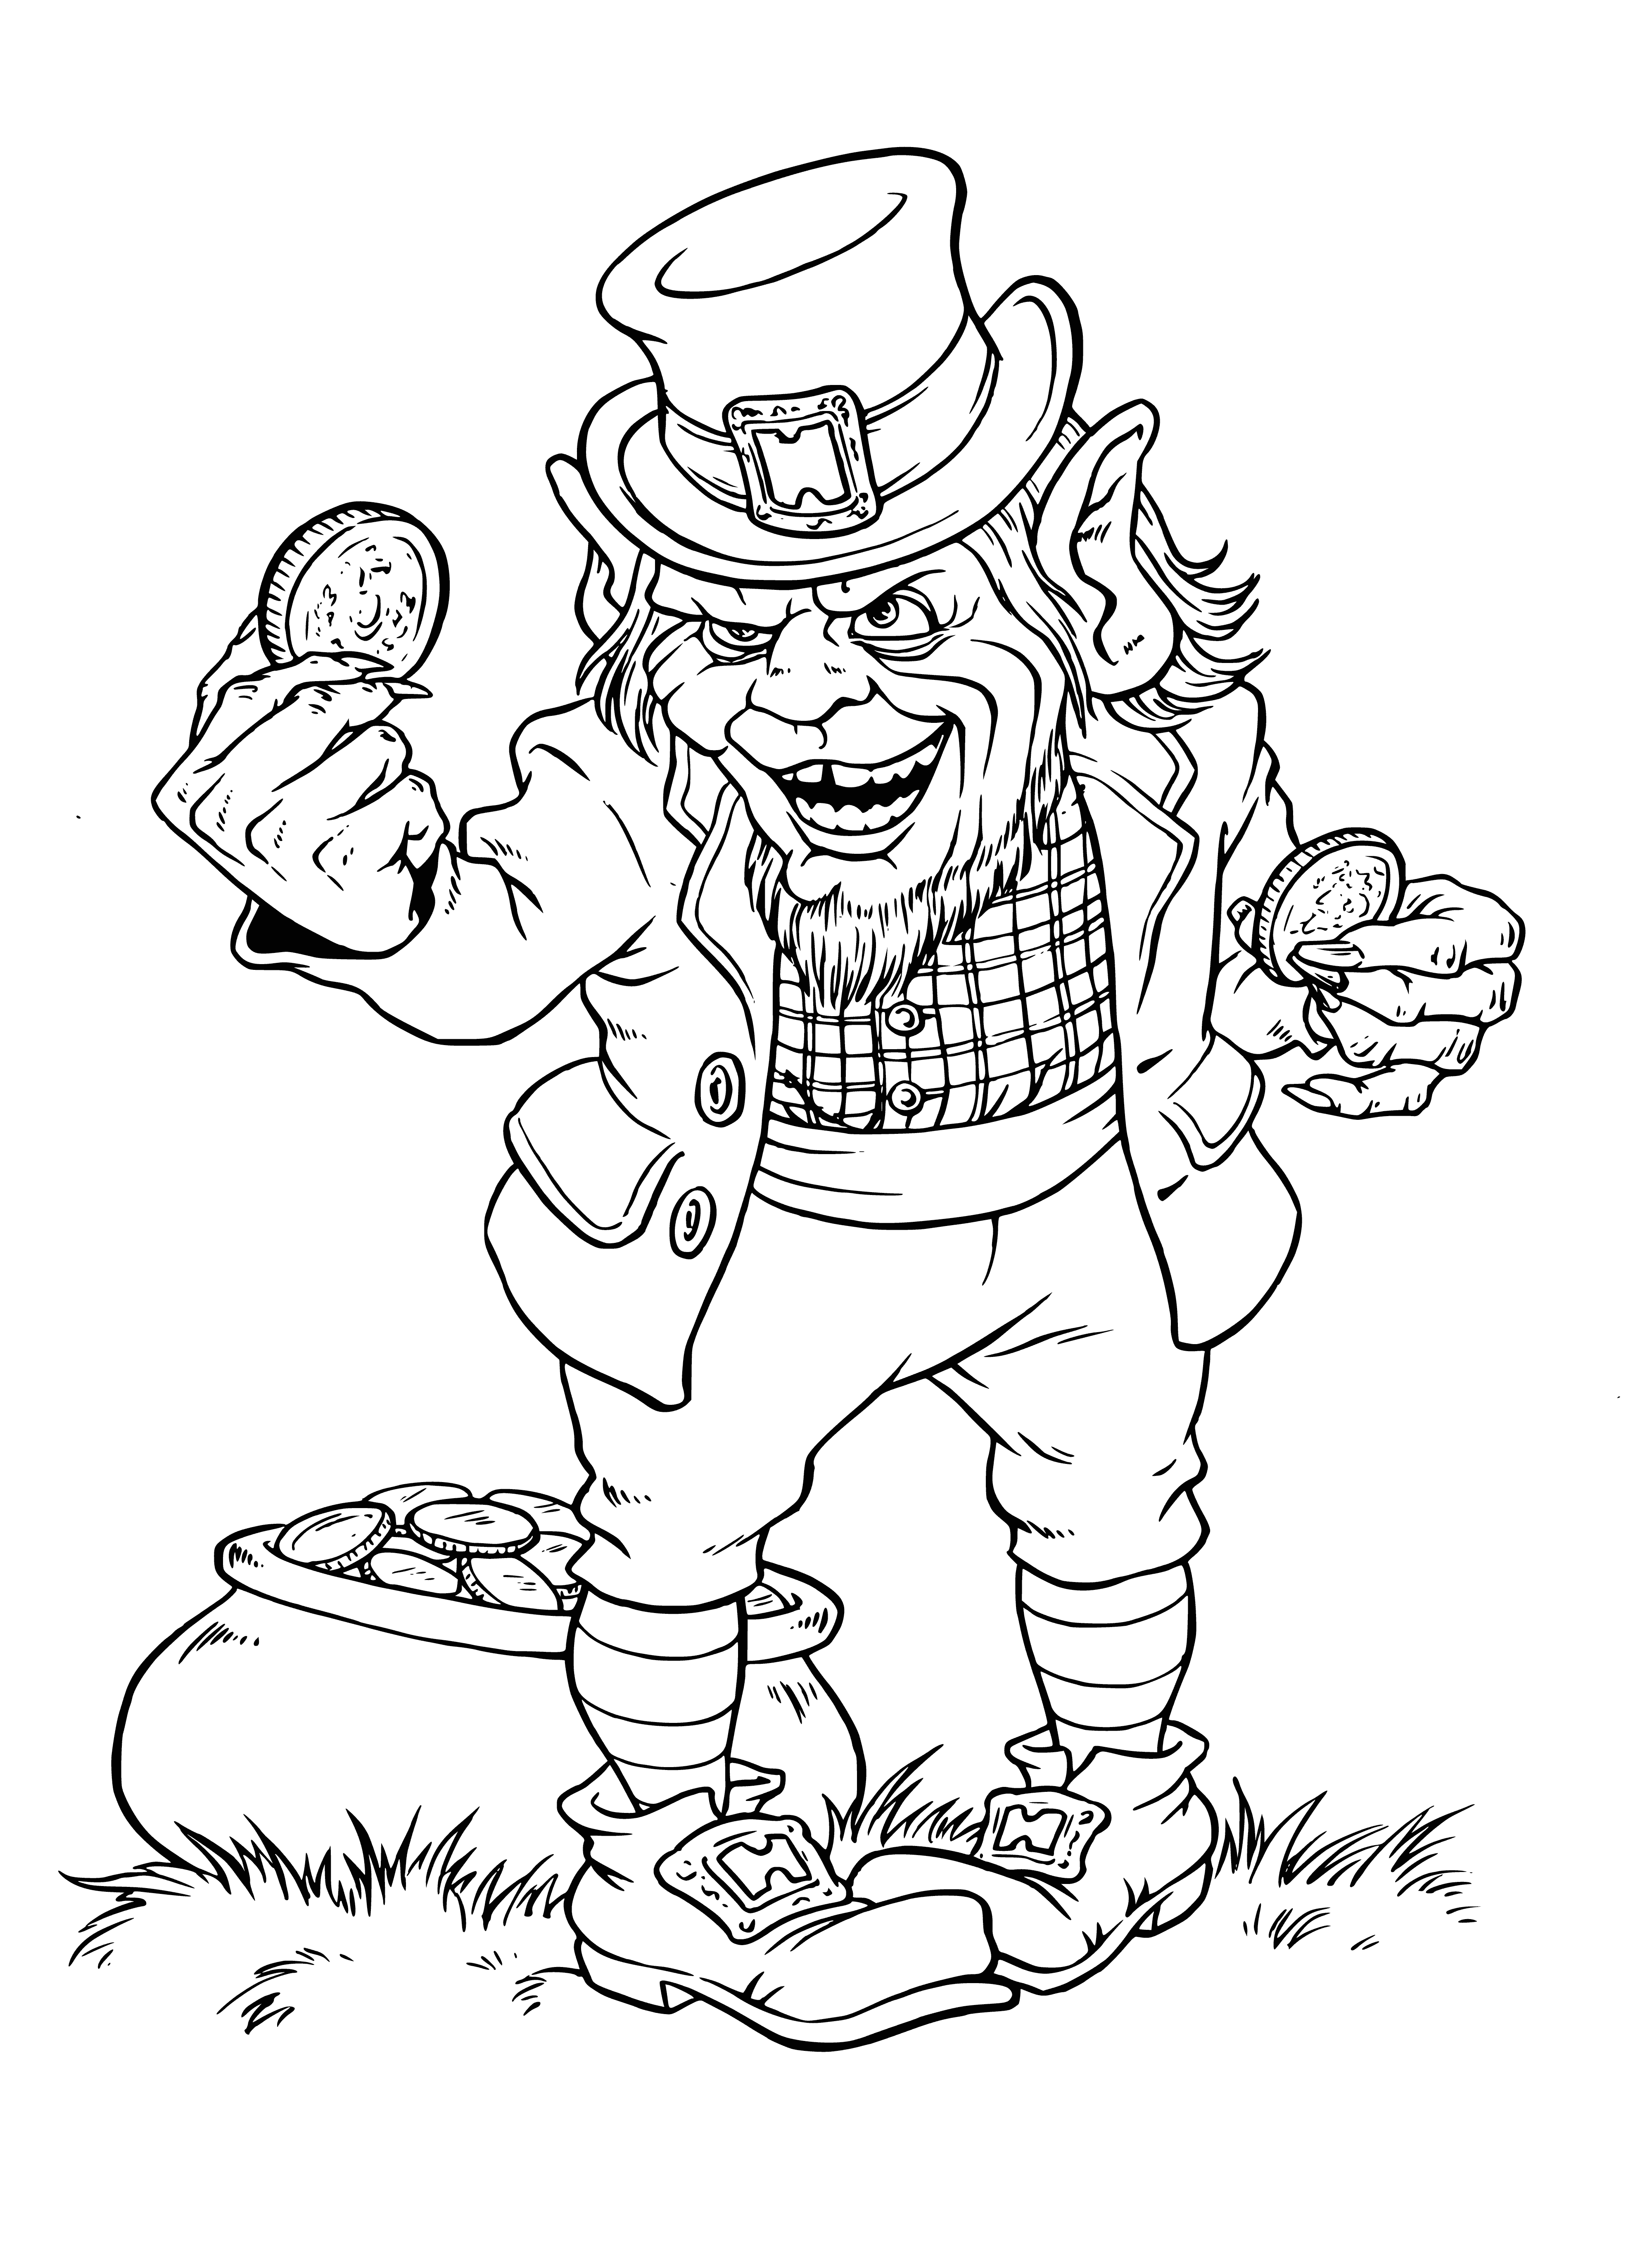 coloring page: A massive, vile troll terrorizes the local forest with sharp claws & teeth, enjoying causing suffering. It's a menace who defies any challengers.